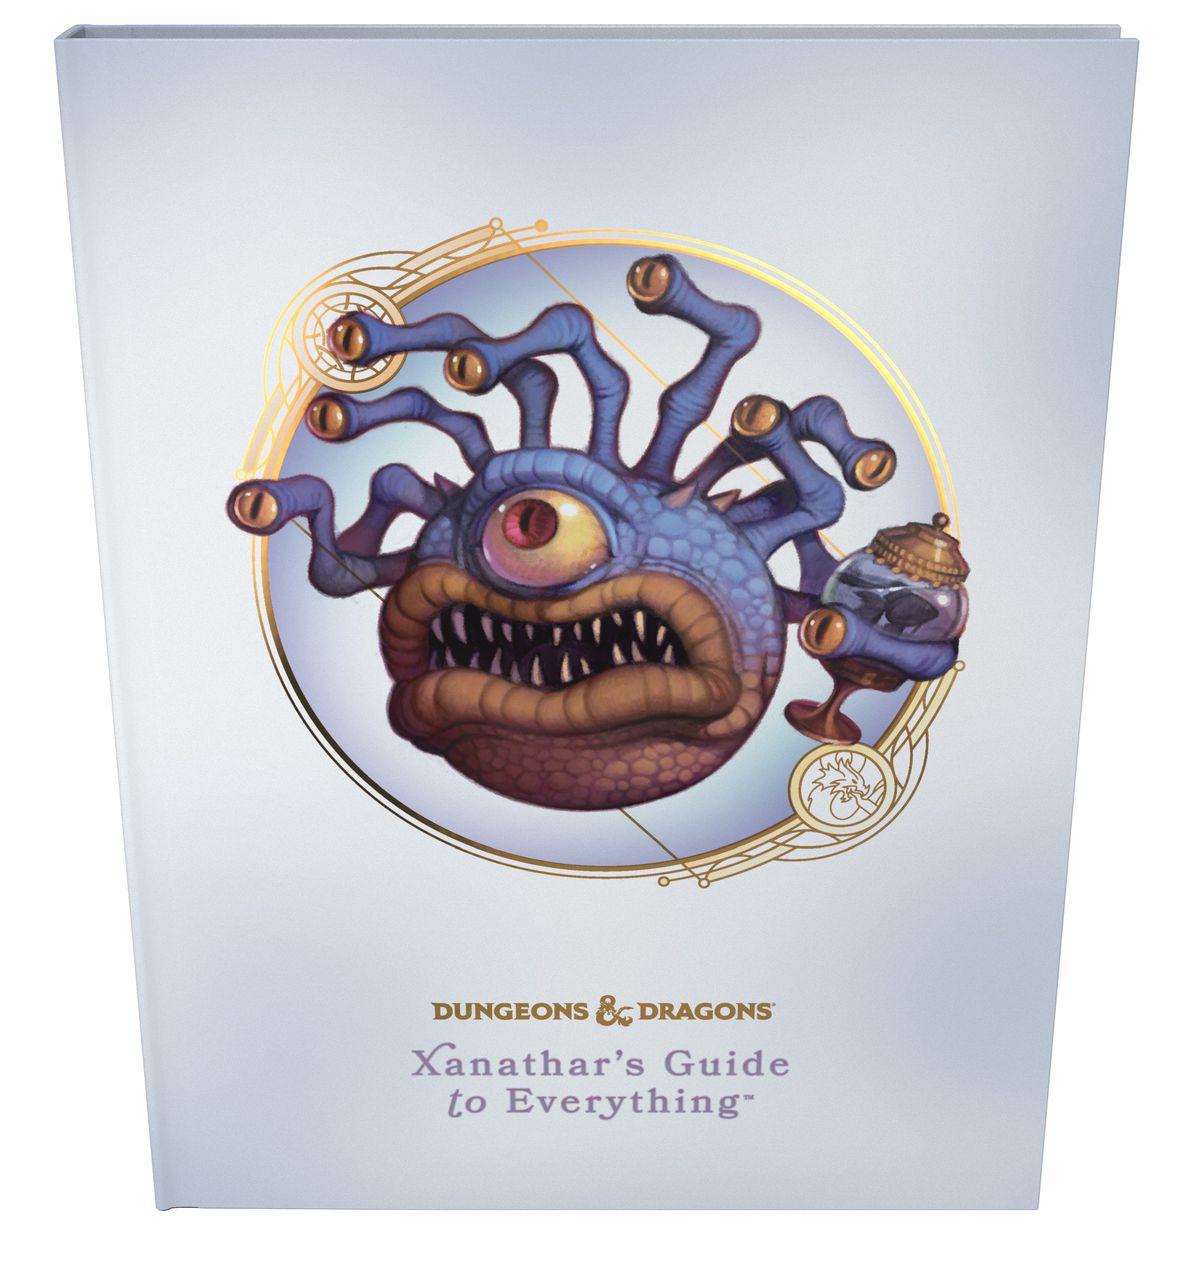 Collector’s Edition cover of Xanathar’s Guide to Everything, featuring a white background and gold foil.